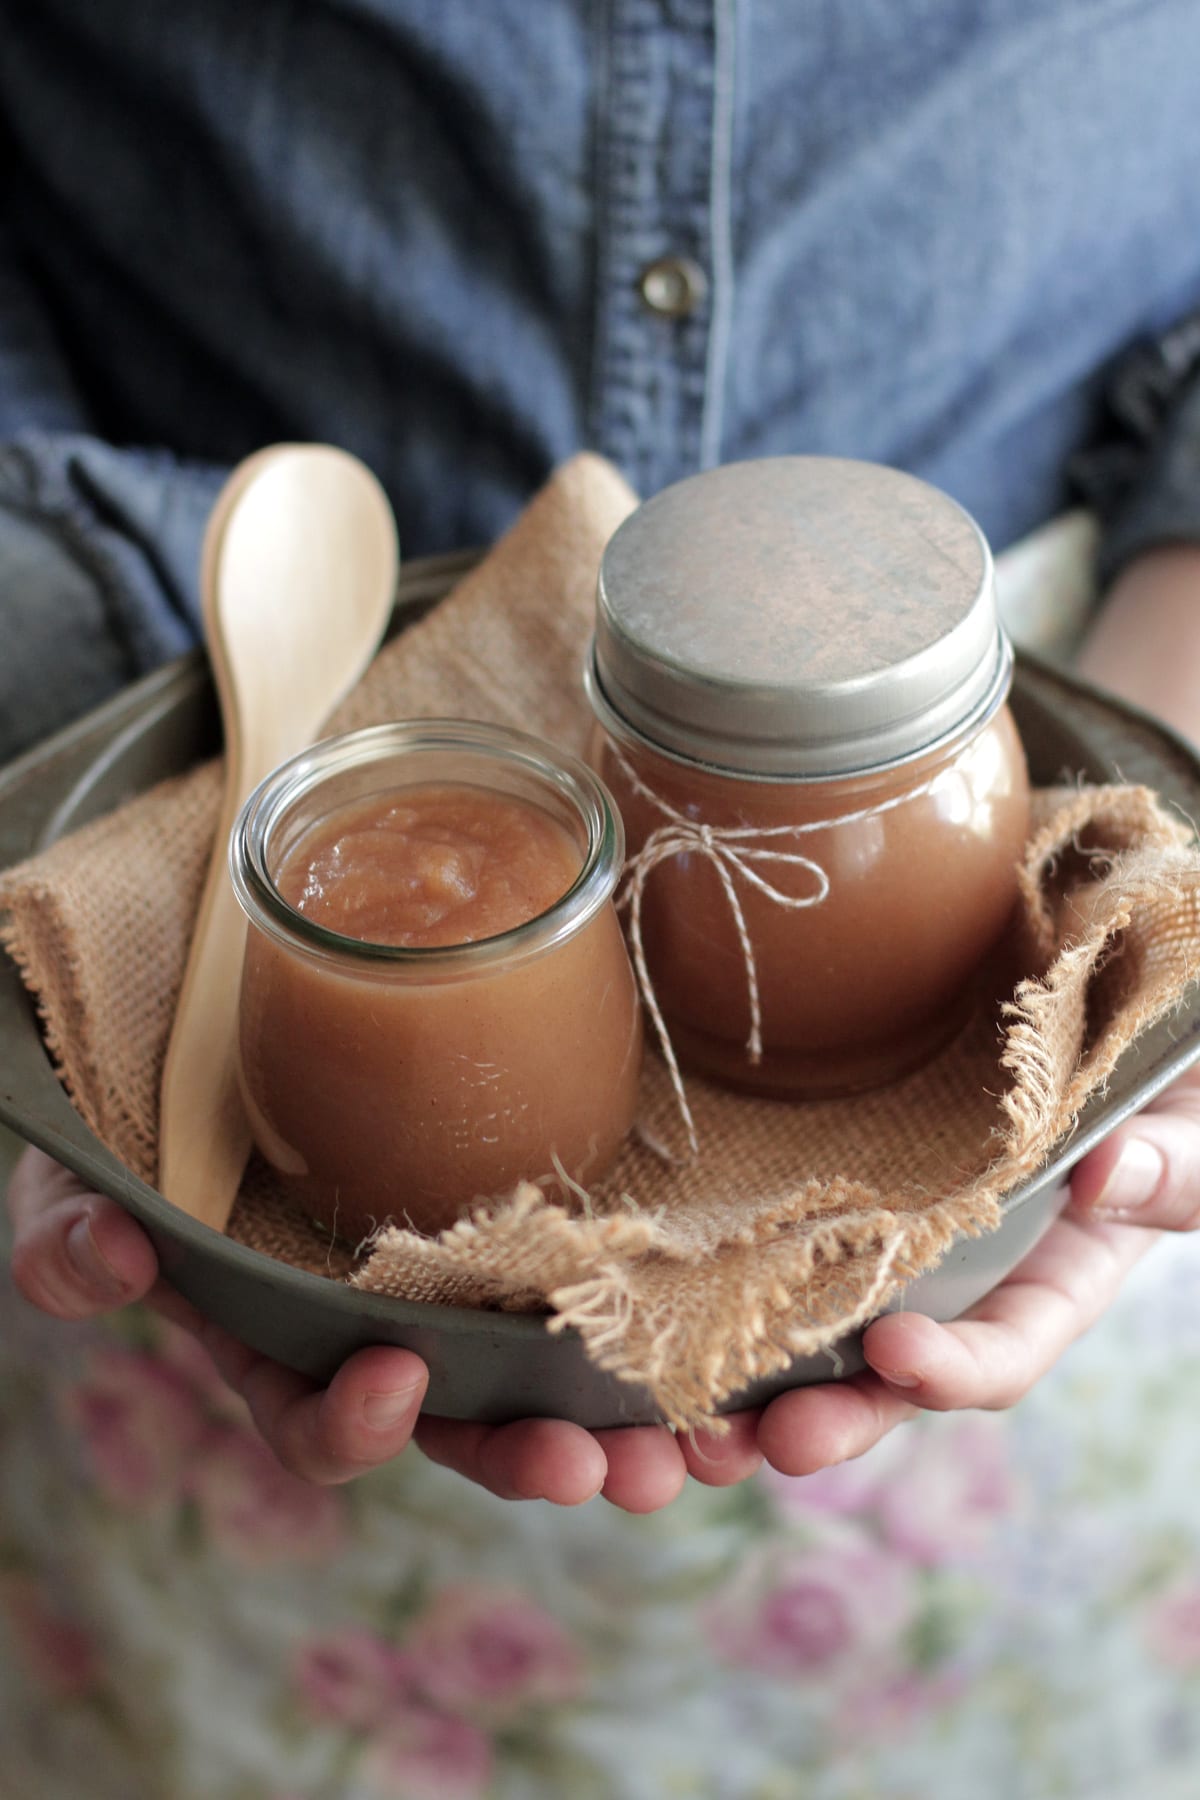 How to Make the Best Slow-Cooker Homemade Applesauce